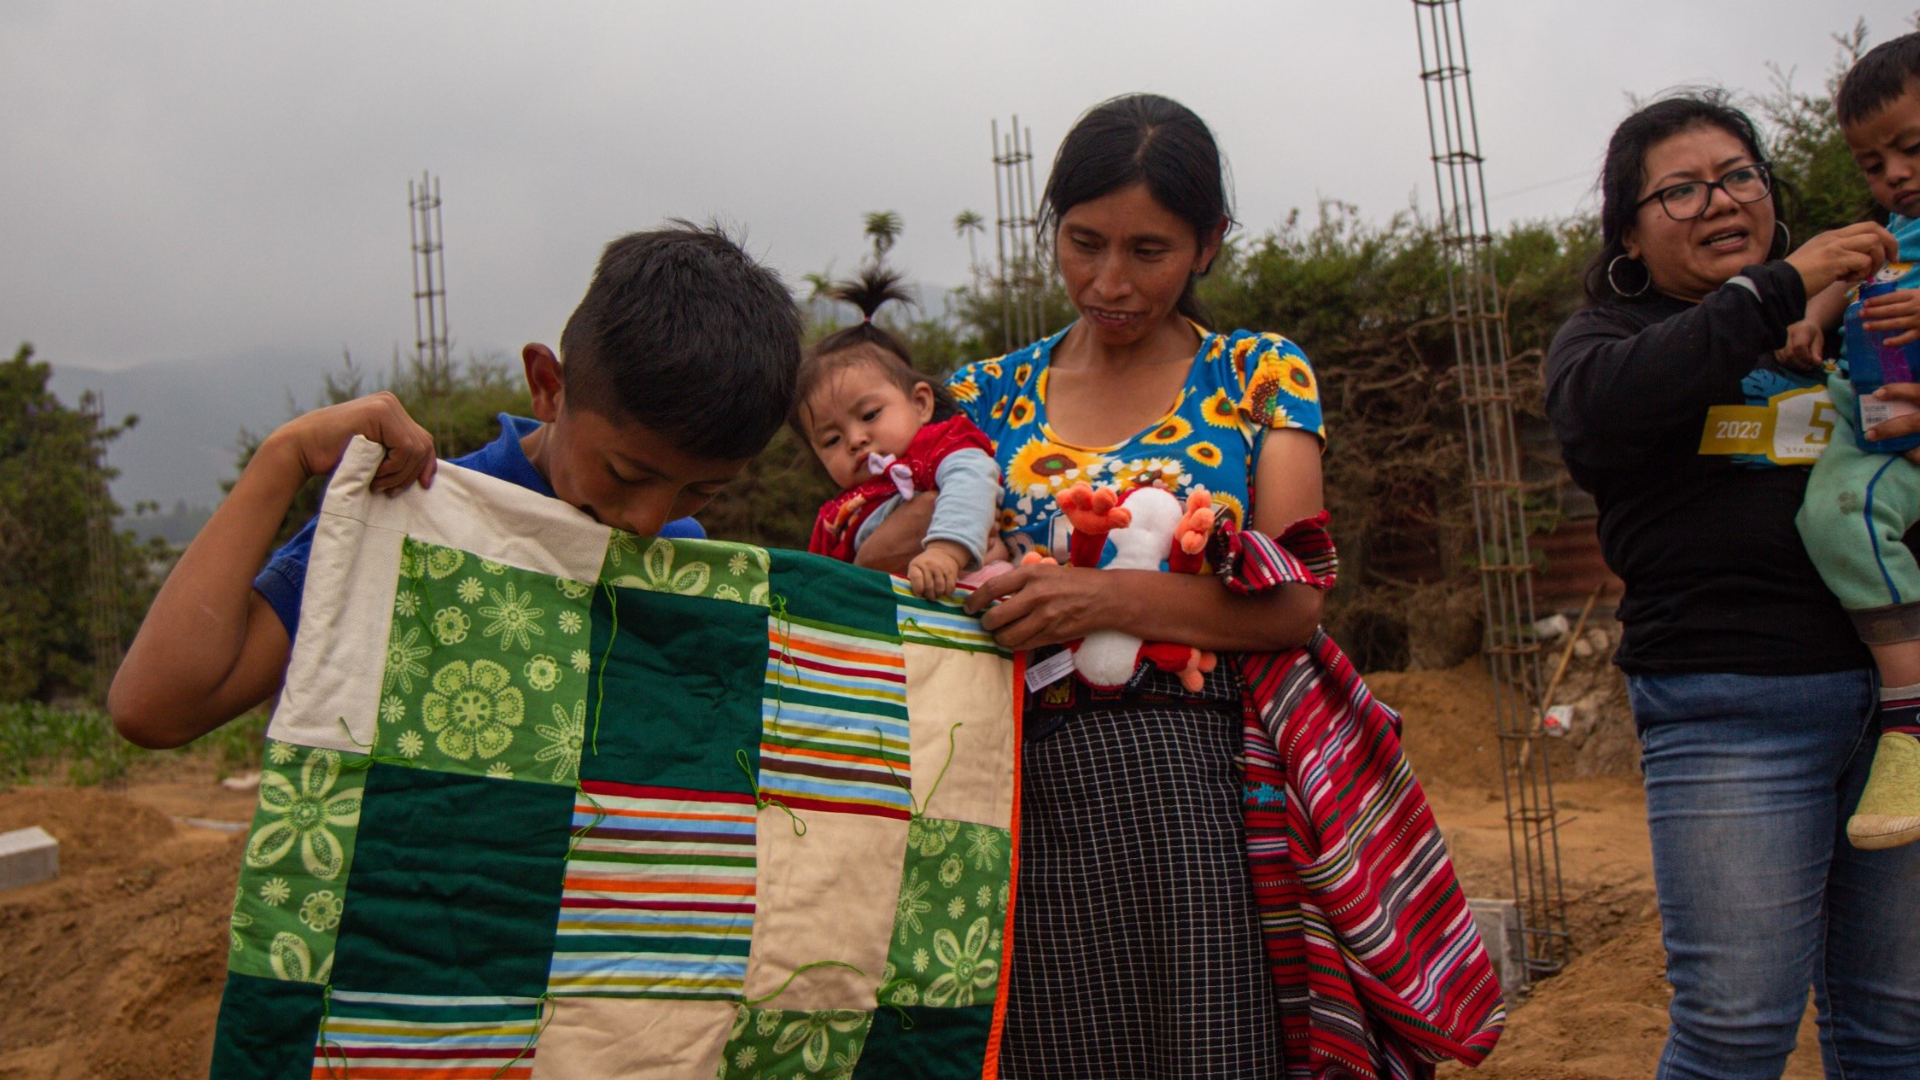 Guatemalan boy and mother holding a baby admire a handmade quilt